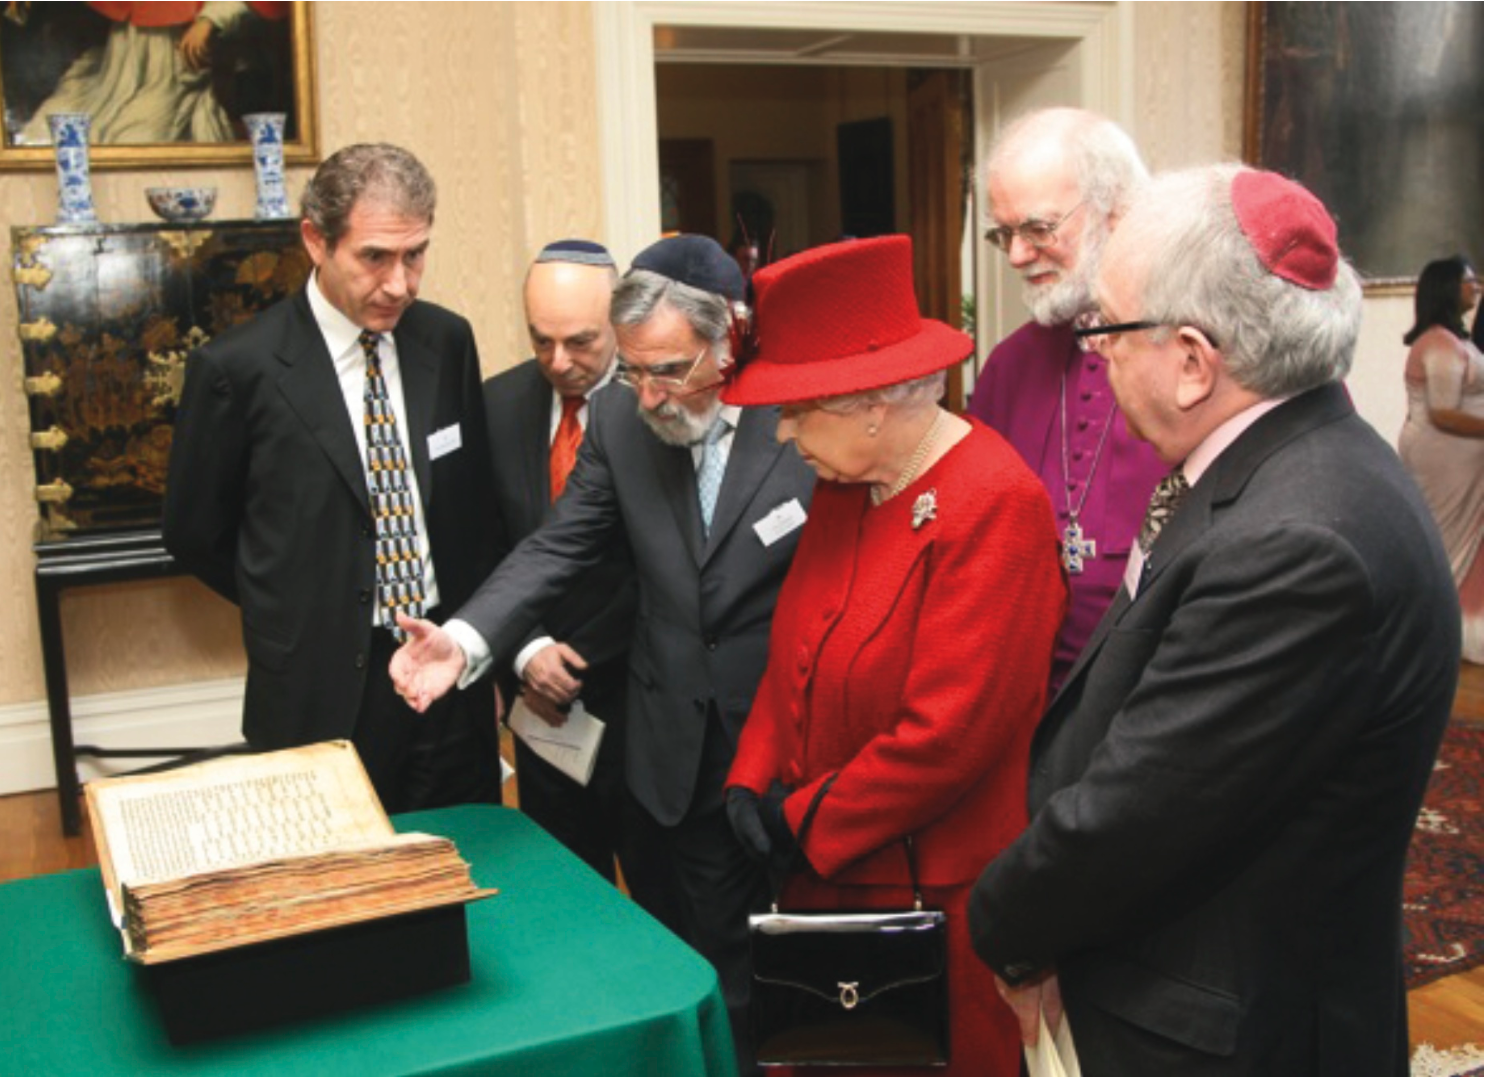 Queen Elizabeth II, Chief Rabi Lord Jonathan Sacks and Archbishop of Canterbury Rown Williams, viewing Valmdonna Codex I in Lambeth Palace in honor of the Queen Diamond Jubilee, 15 February 2012.